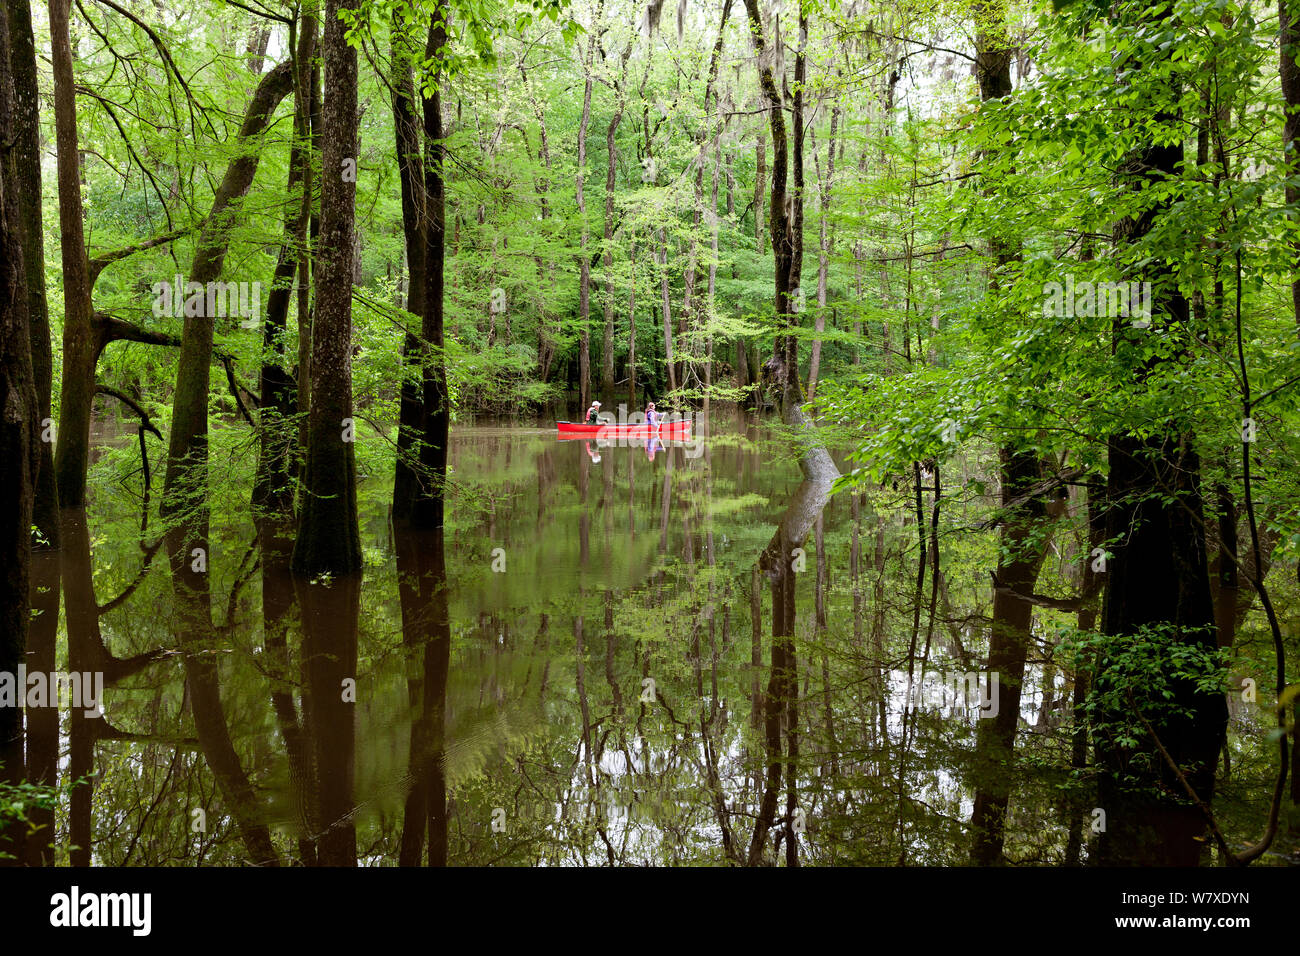 Two people canoeing in the distance, Congaree National Park near Wise Lake, South Carolina, USA.  Model Released. Stock Photo